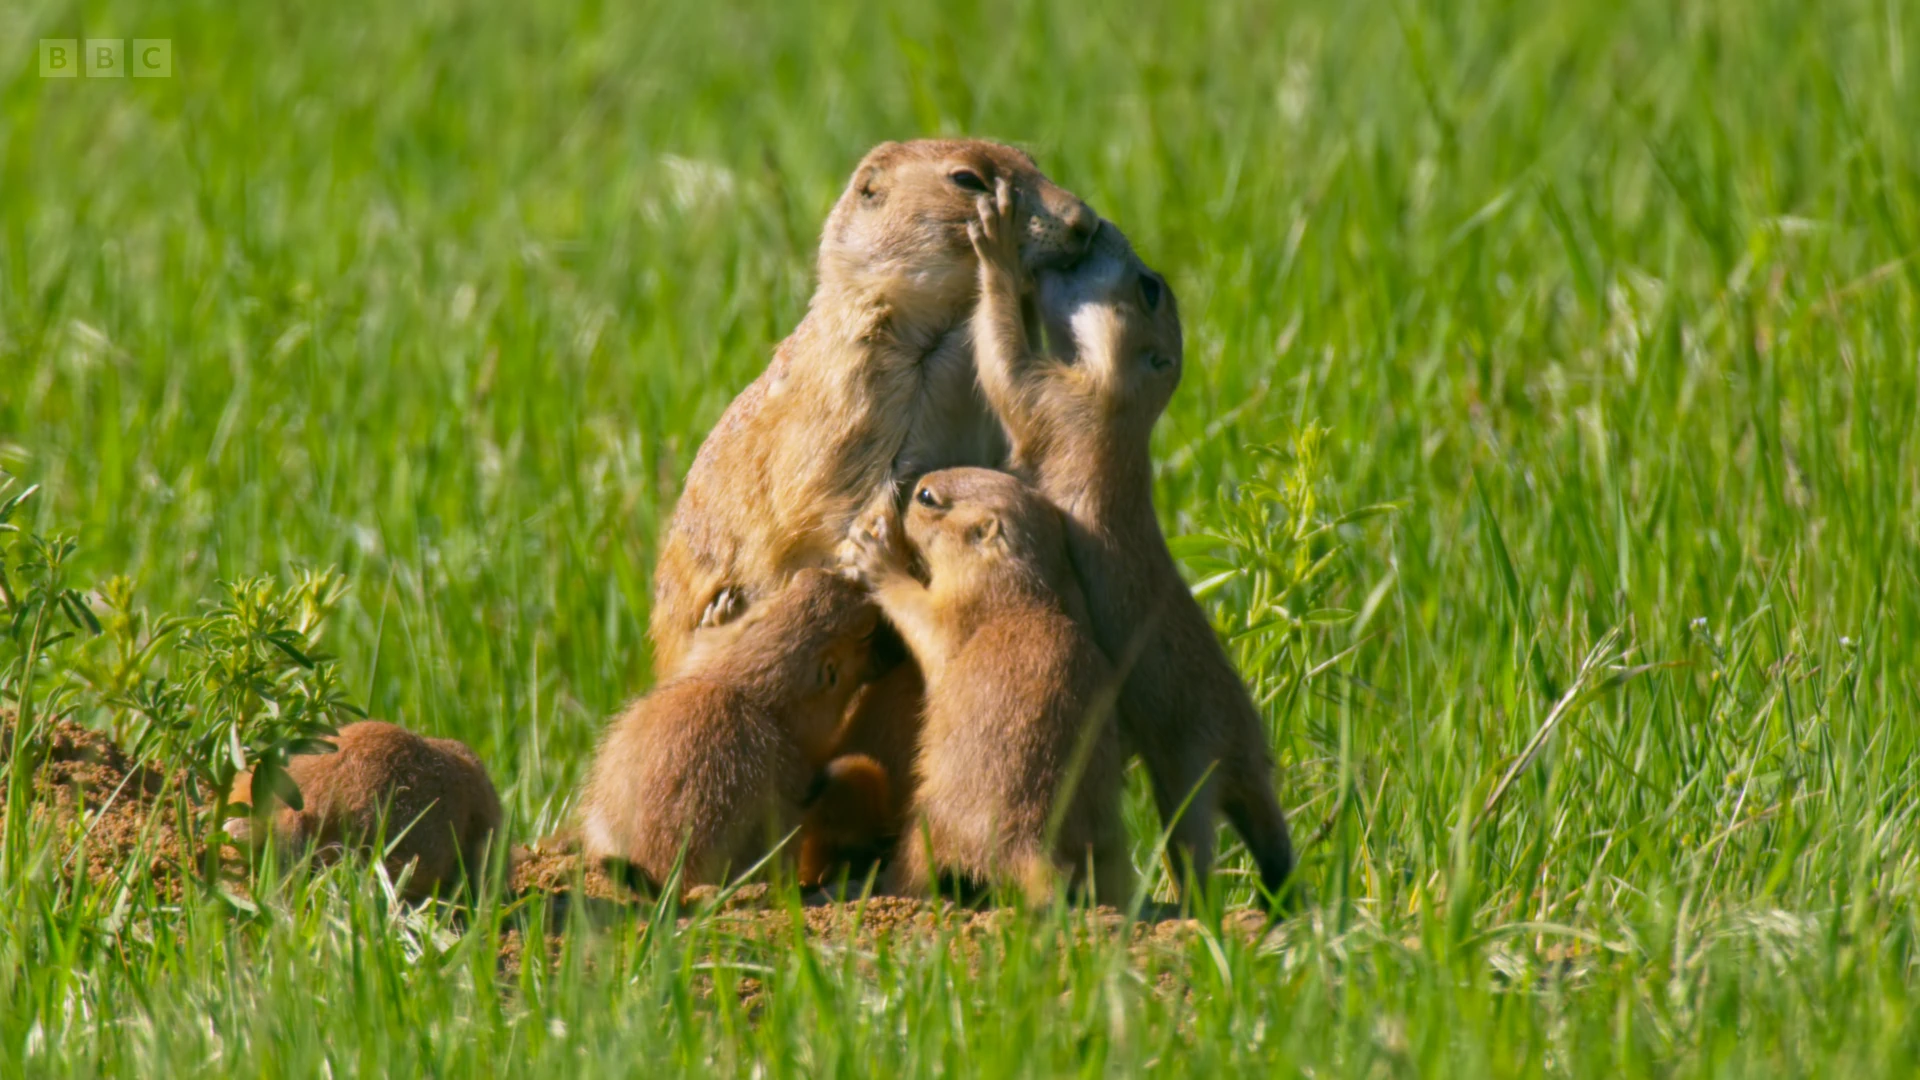 Black-tailed prairie dog (Cynomys ludovicianus) as shown in Seven Worlds, One Planet - North America